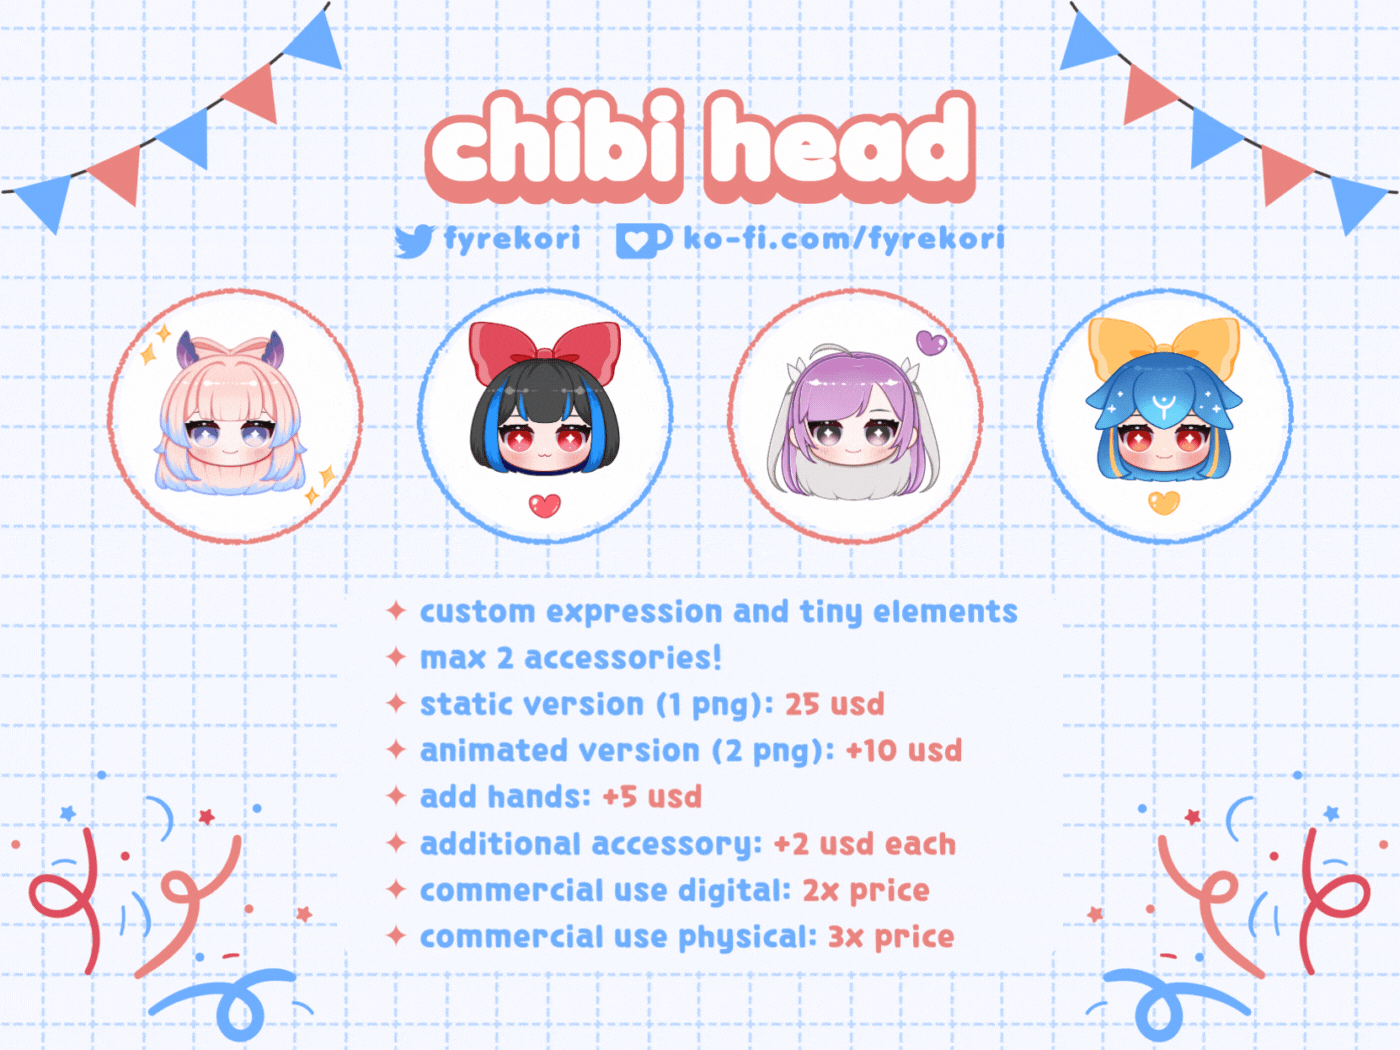 ♡ ´･ᴗ･ `♡ Chibi Head comms are now open! ♡ ´･ᴗ･ `♡